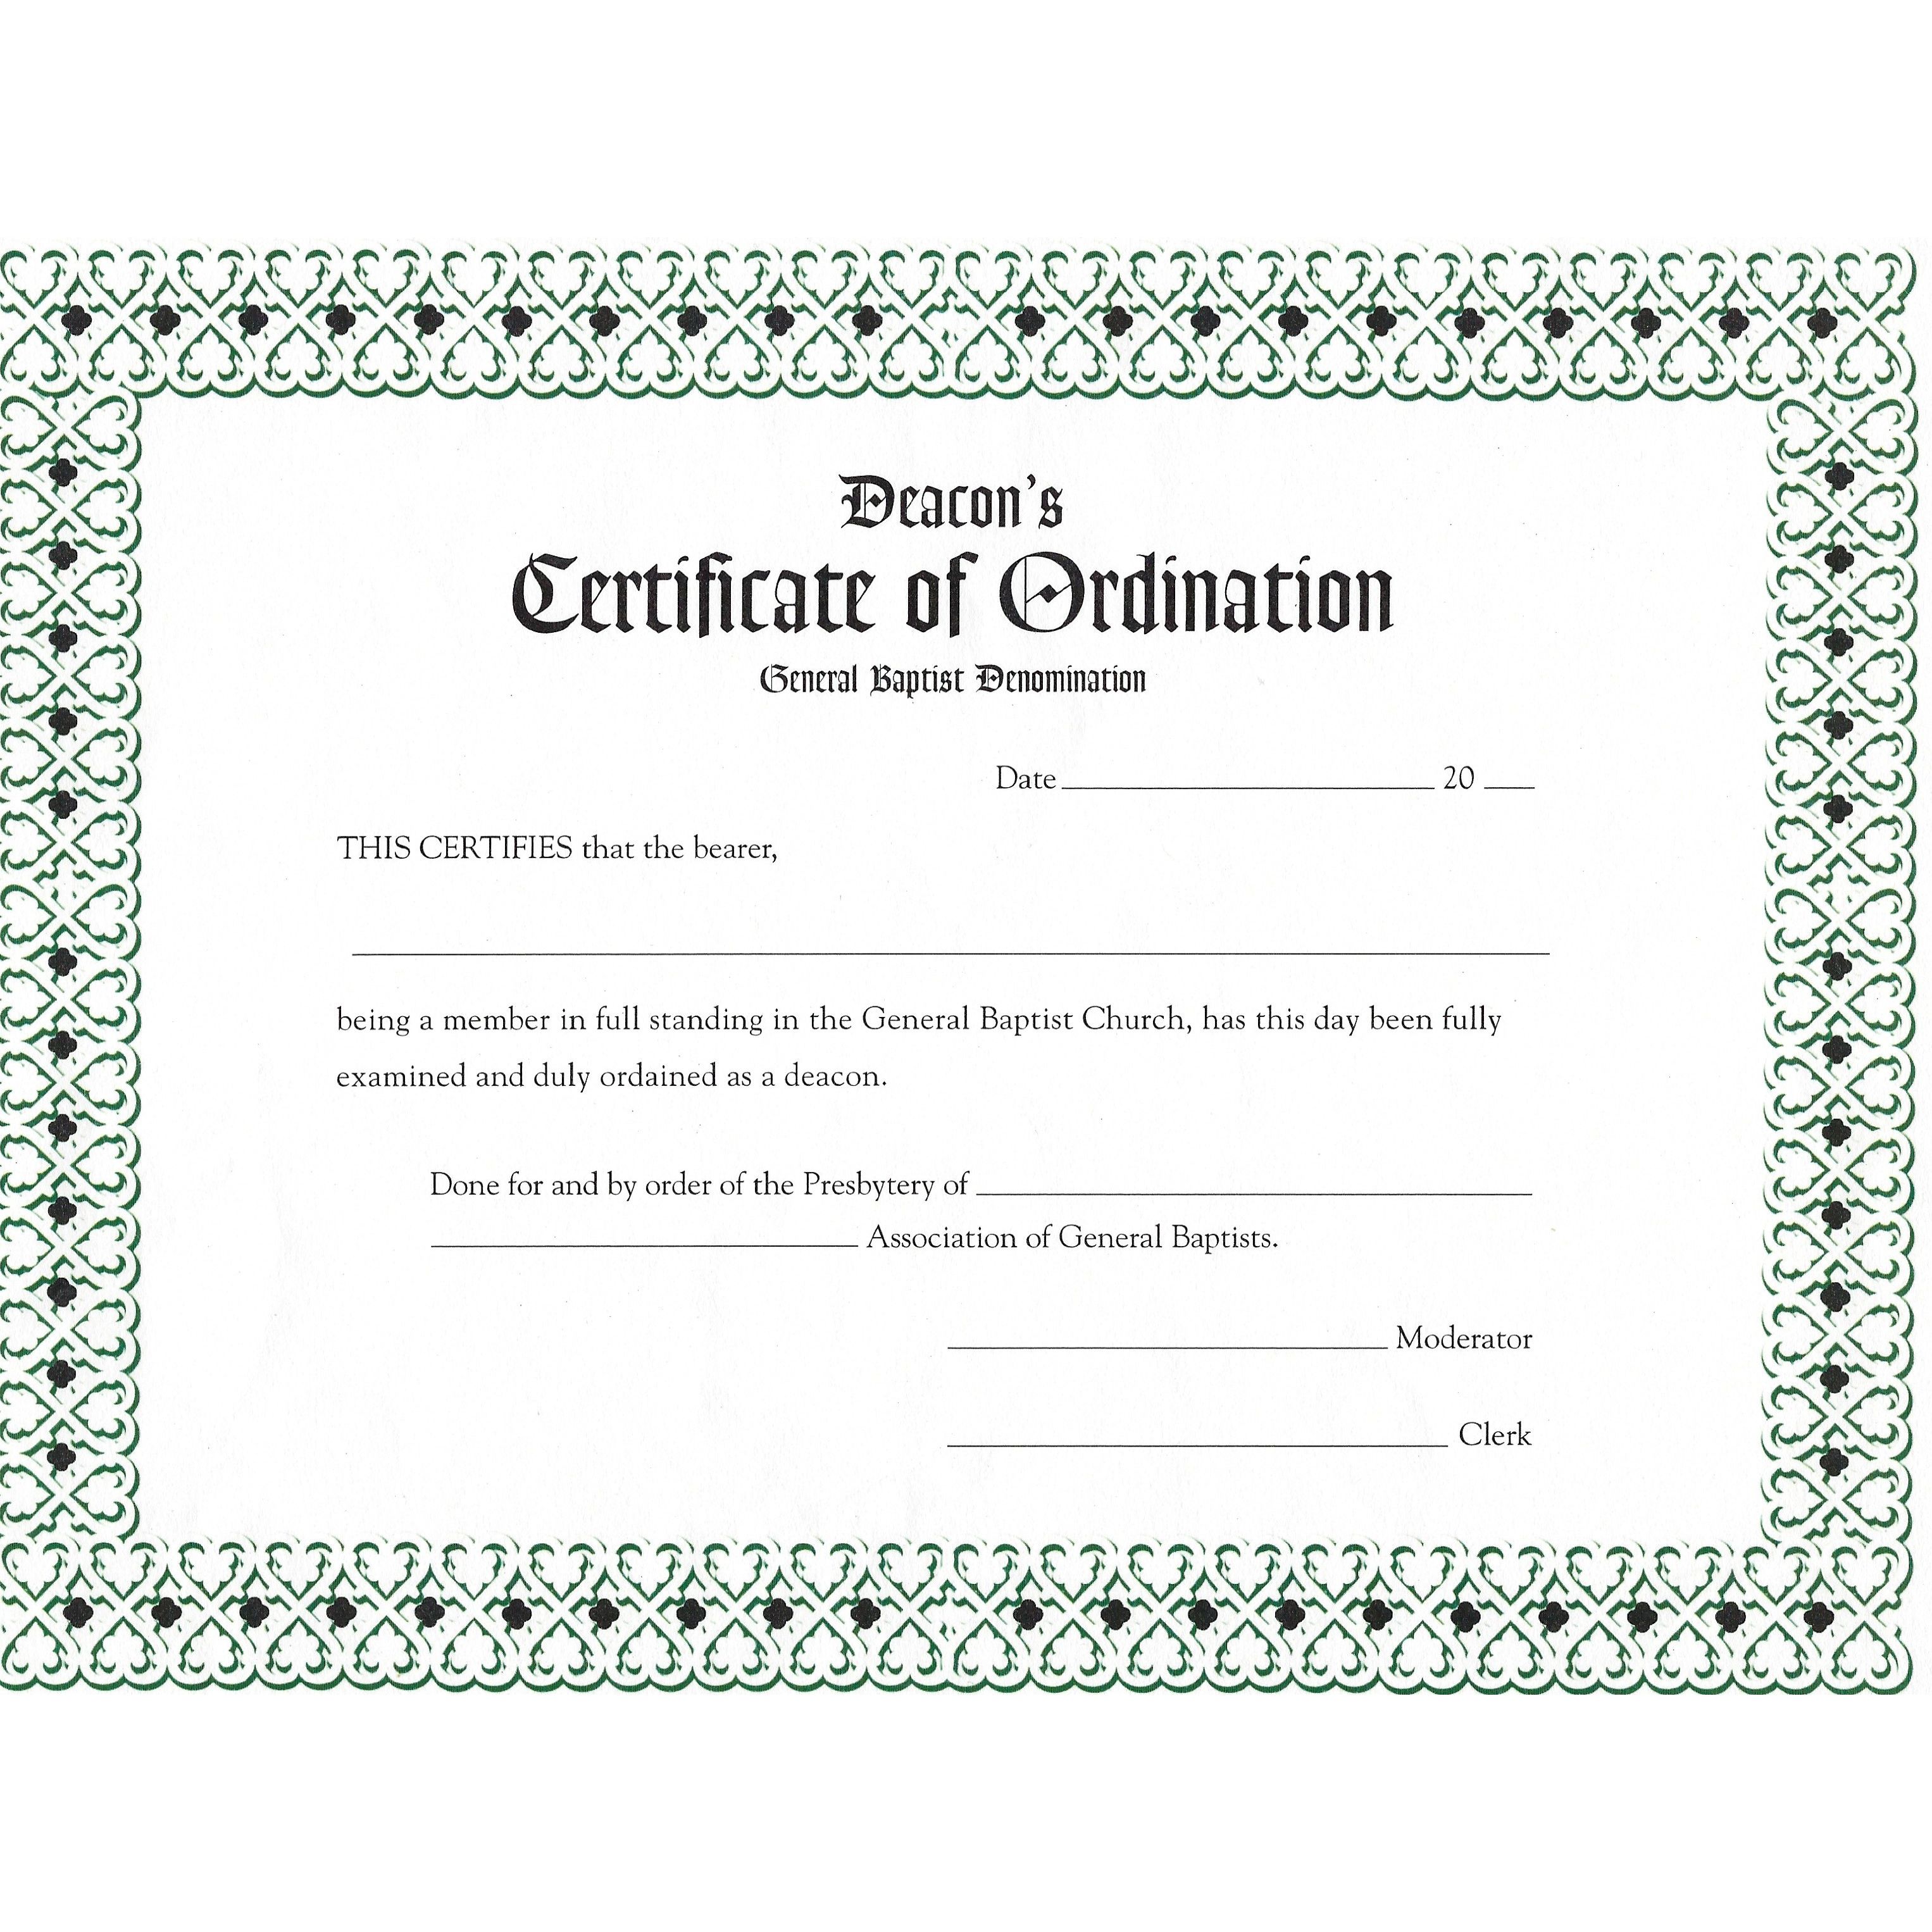 General Baptist Items Deacons's Certificate of Ordination (8.5" x 11")